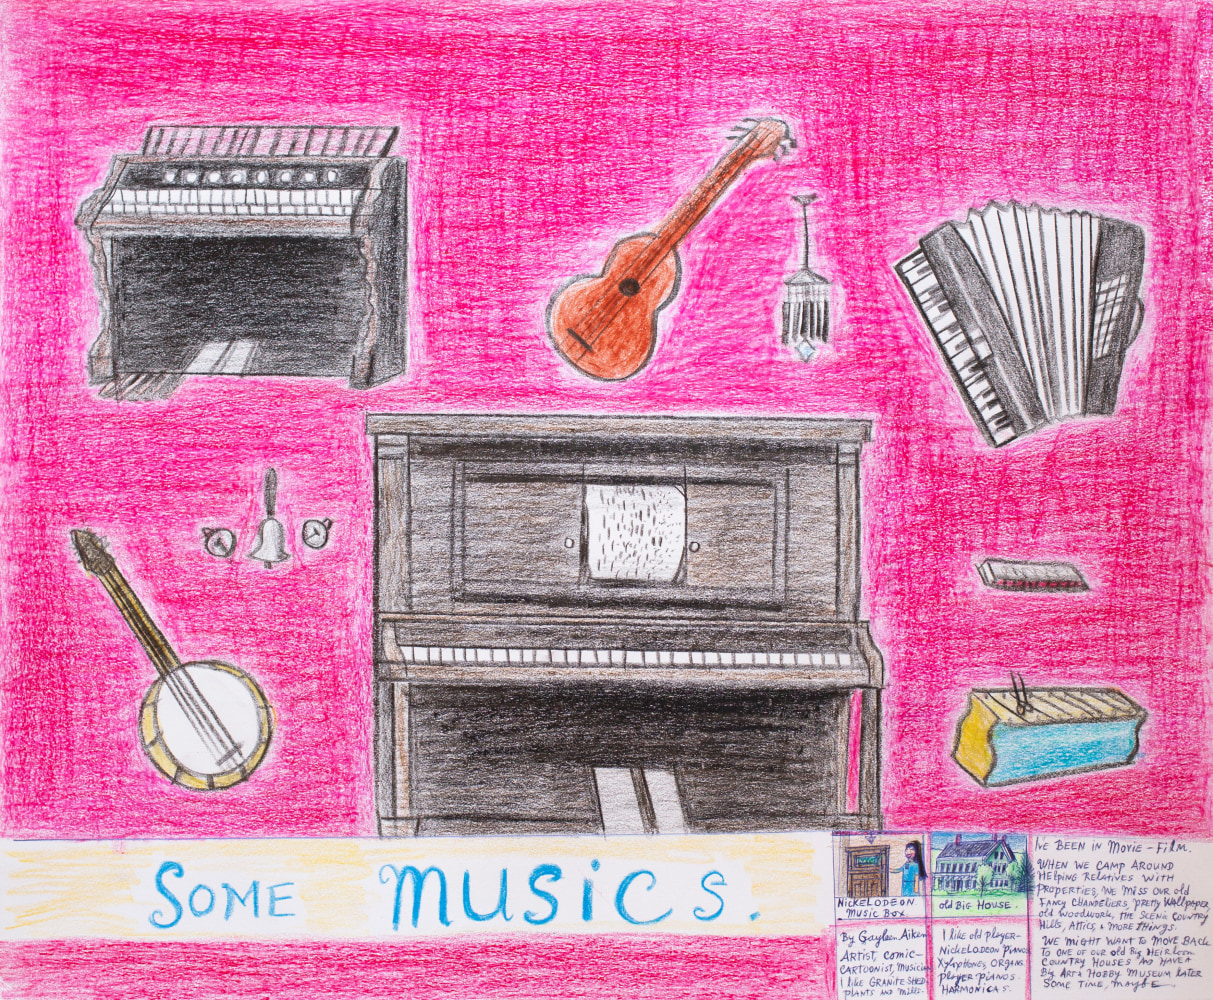 Some musics, 1994
Colored pencil, ballpoint pen, and crayon on paper
14 x 17 inches